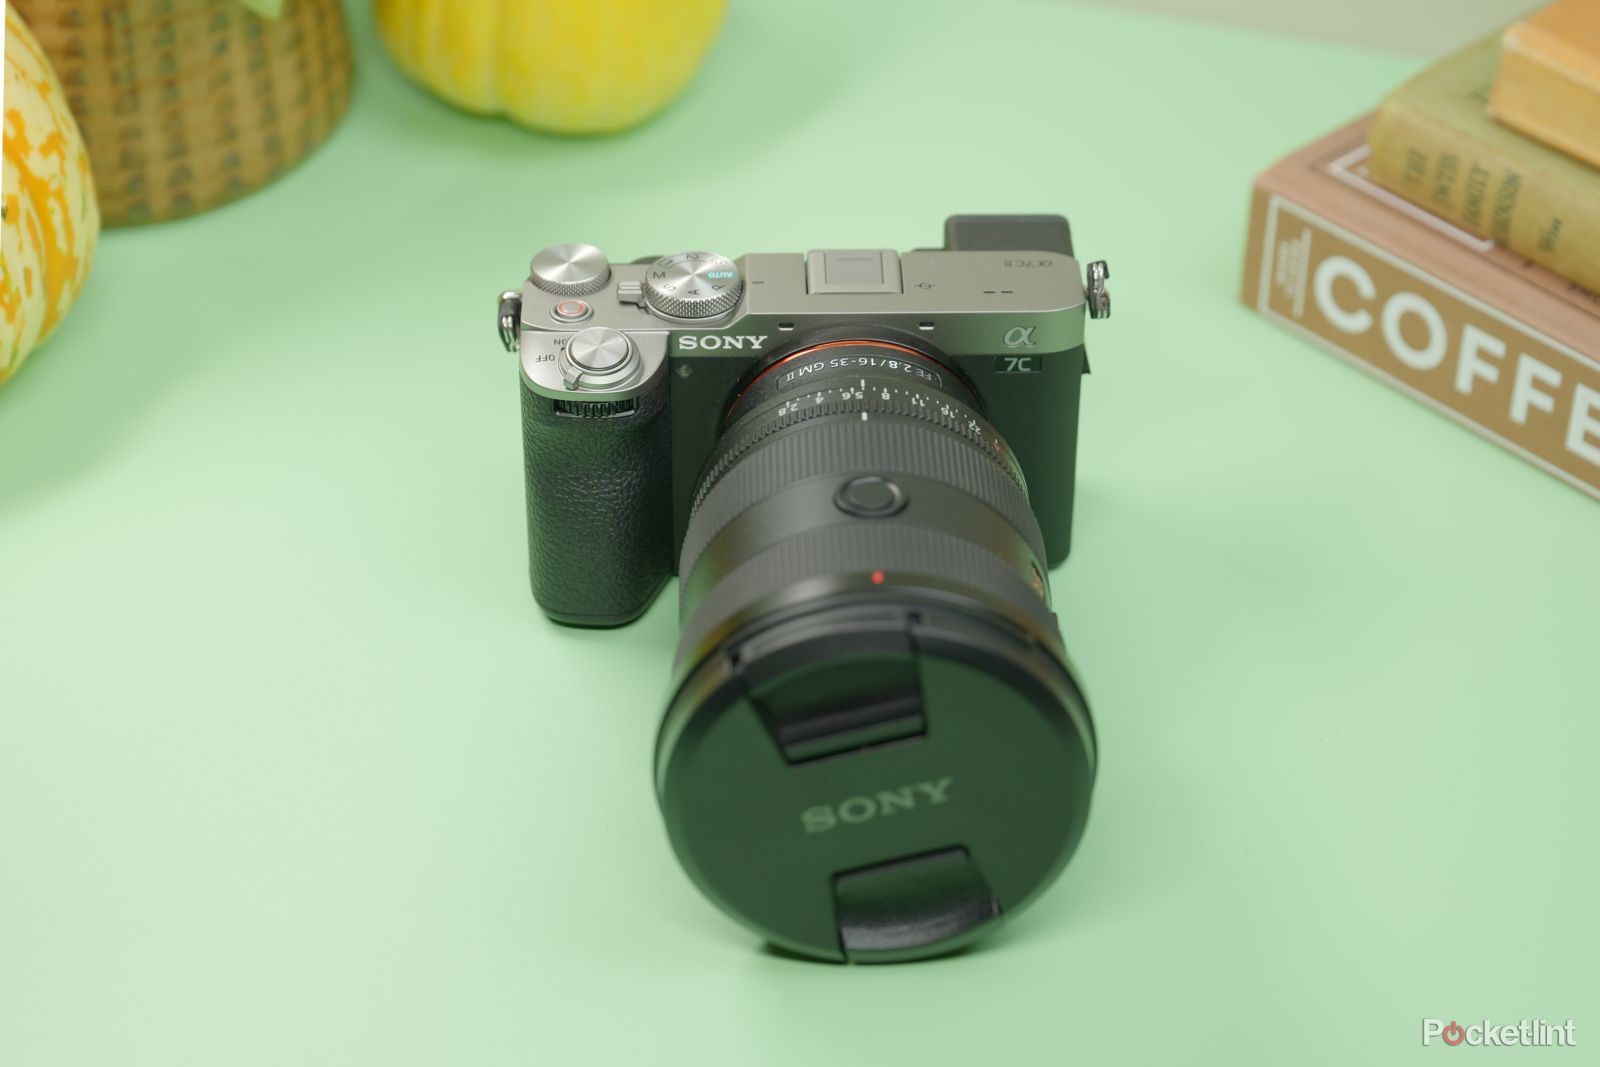 Sony a7C II mirrorless camera is great for capturing everyday content